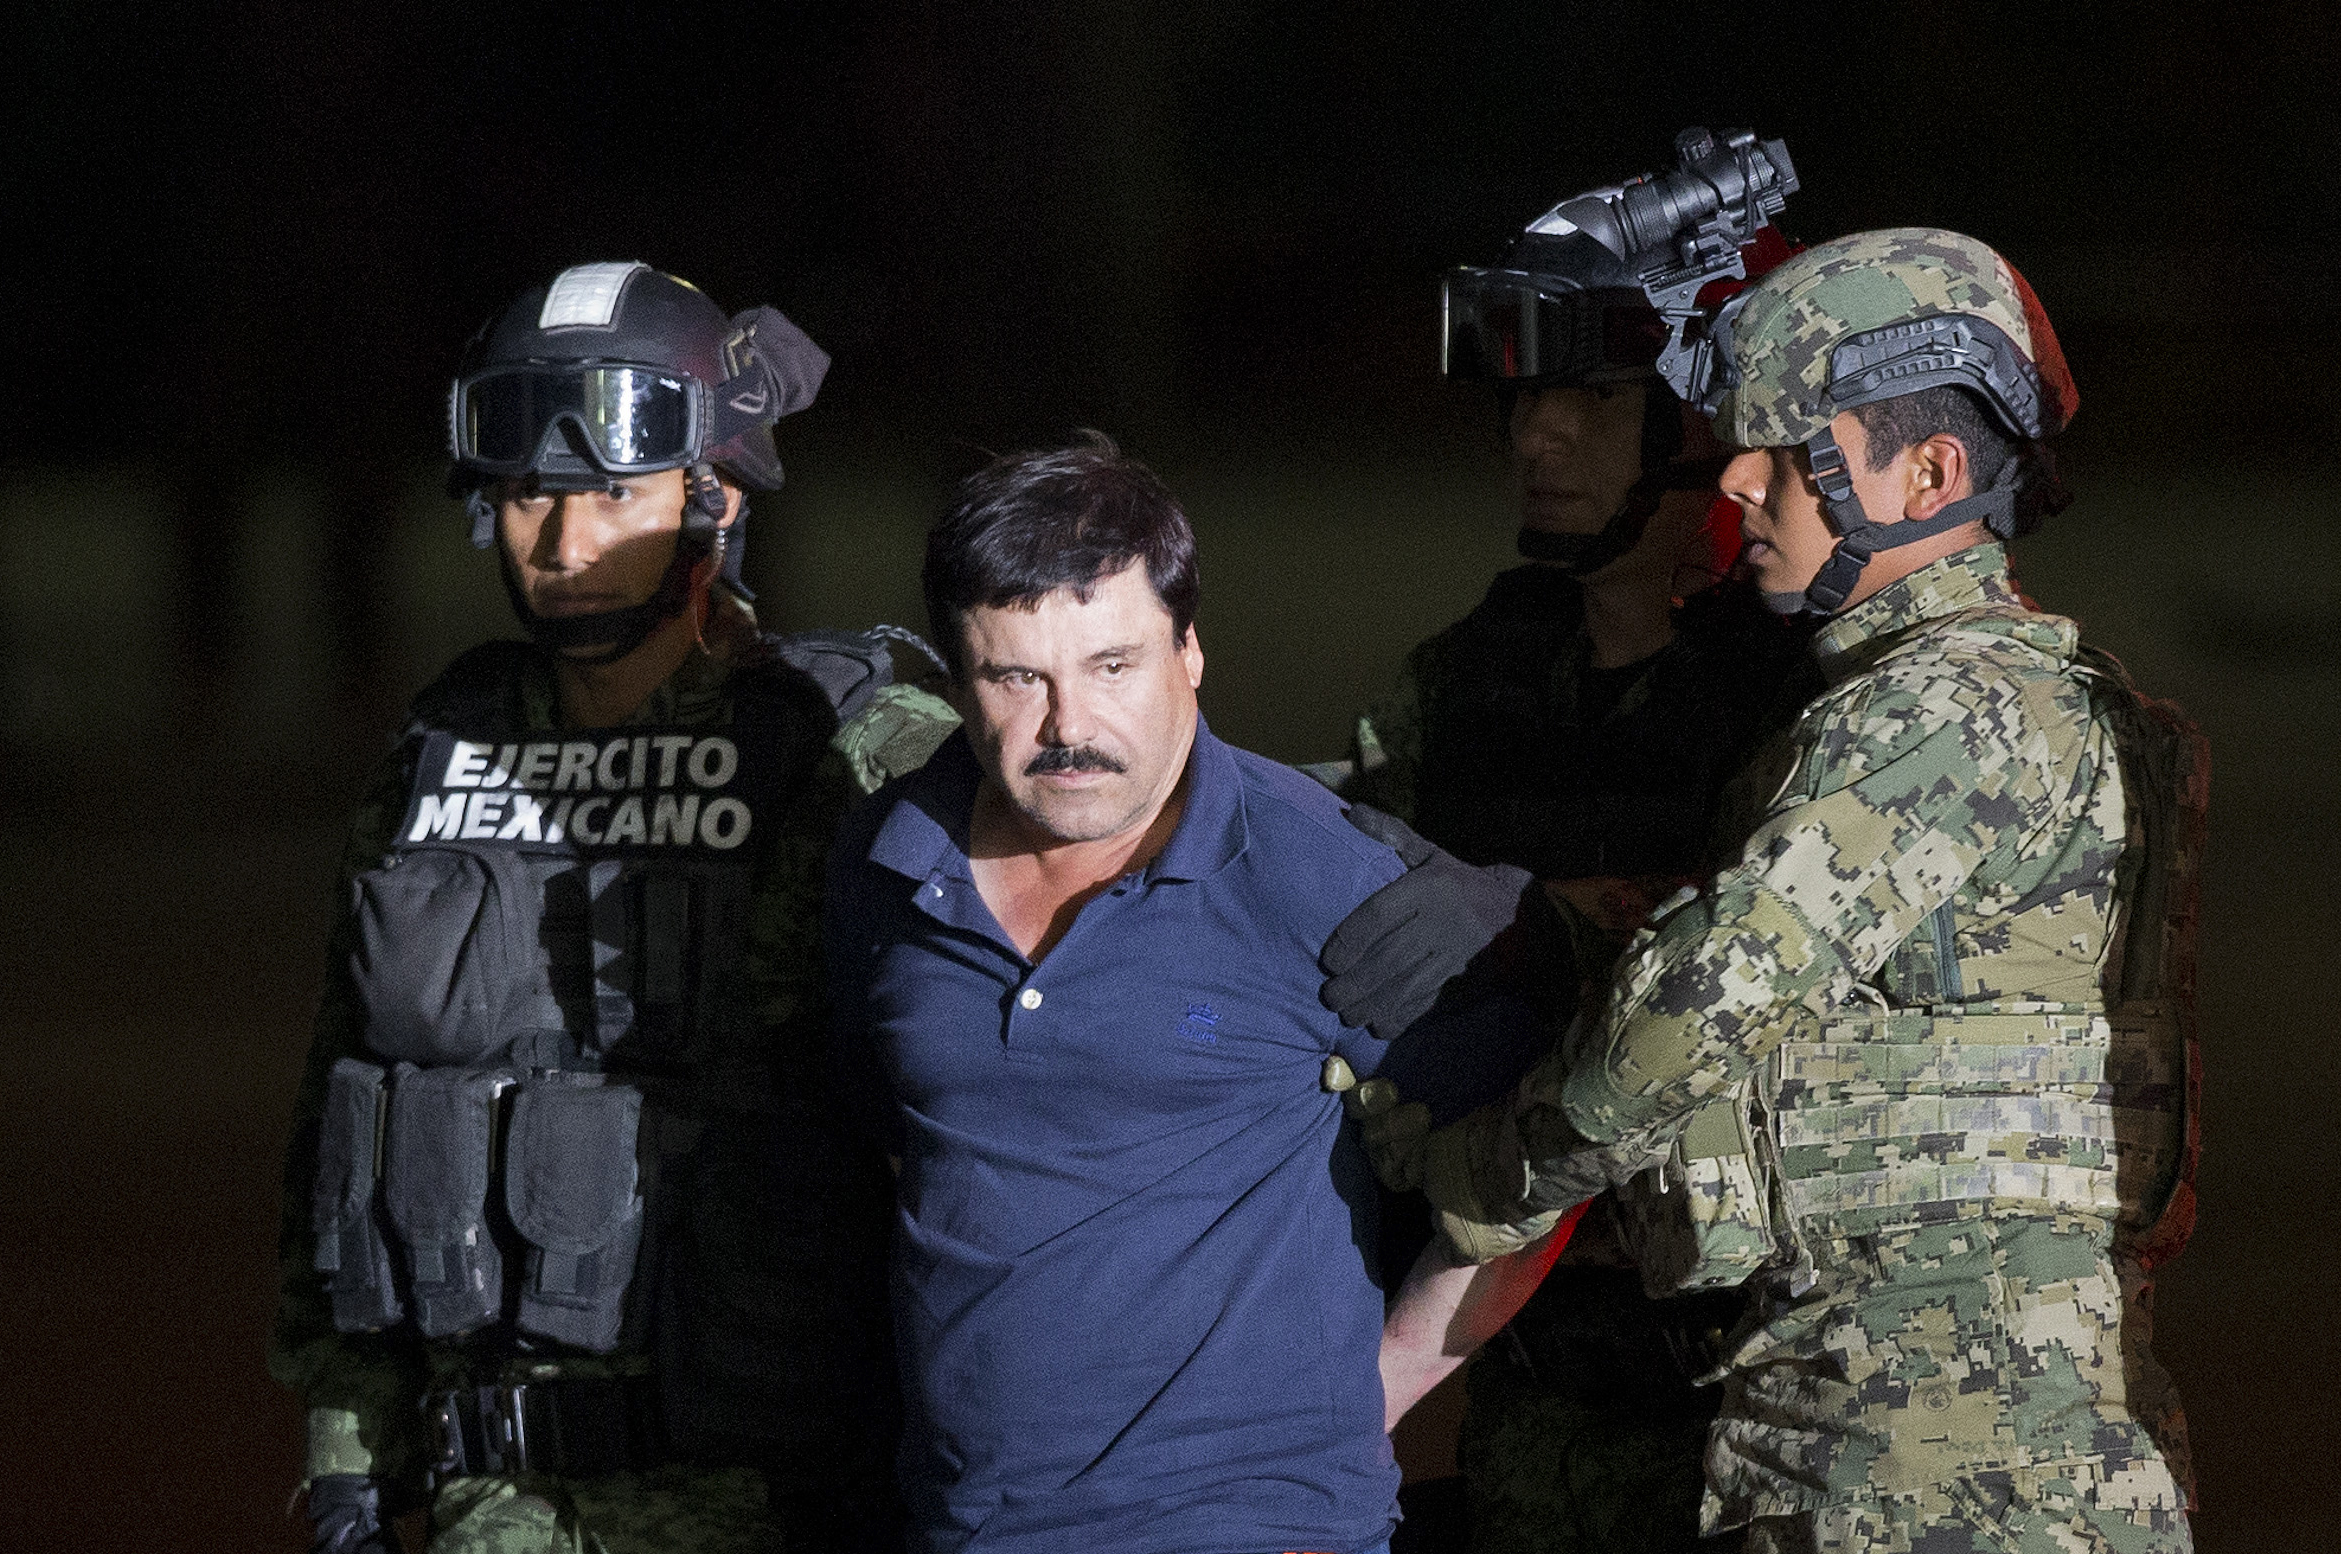 PHOTO: Joaquin "El Chapo" Guzman is made to face the press as he is escorted to a helicopter in handcuffs by Mexican soldiers and marines at a federal hangar in Mexico City, Mexico, Friday, Jan. 8, 2016.